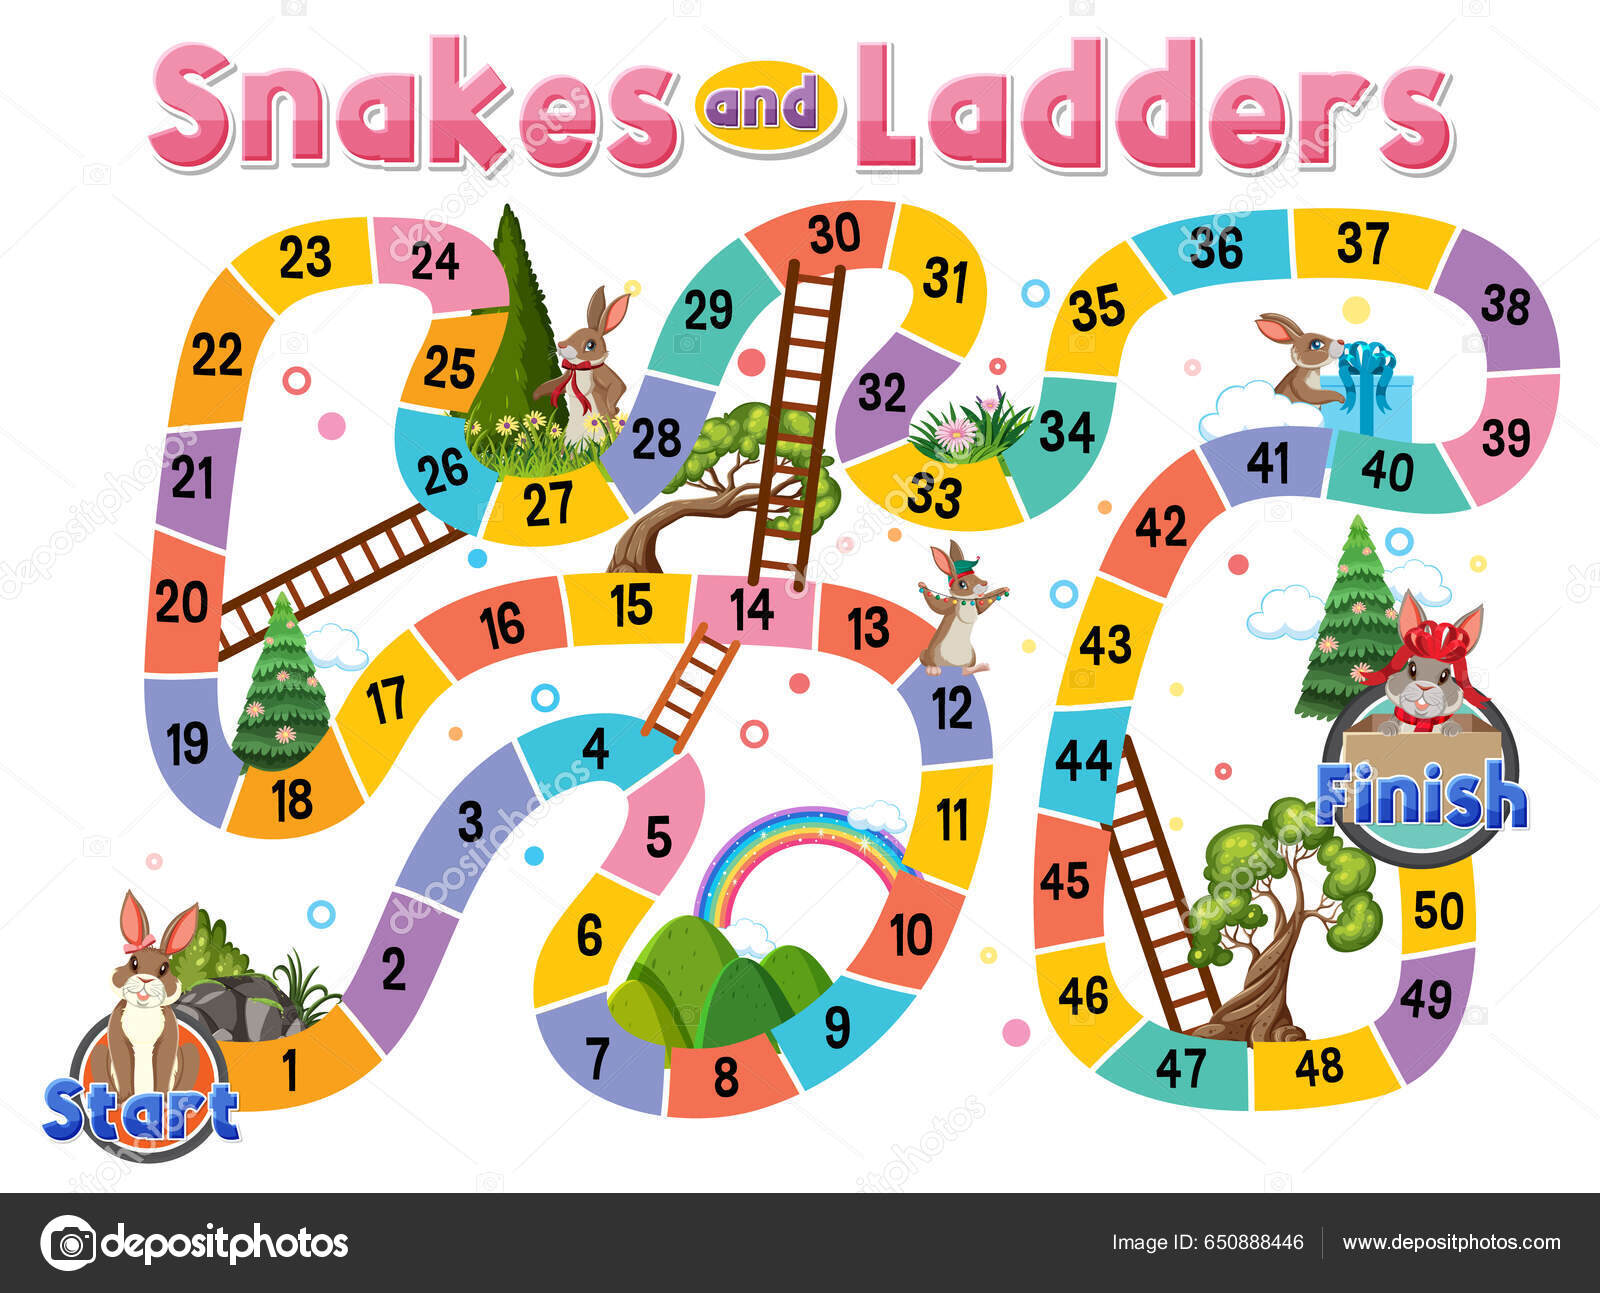 Snakes and ladders board game